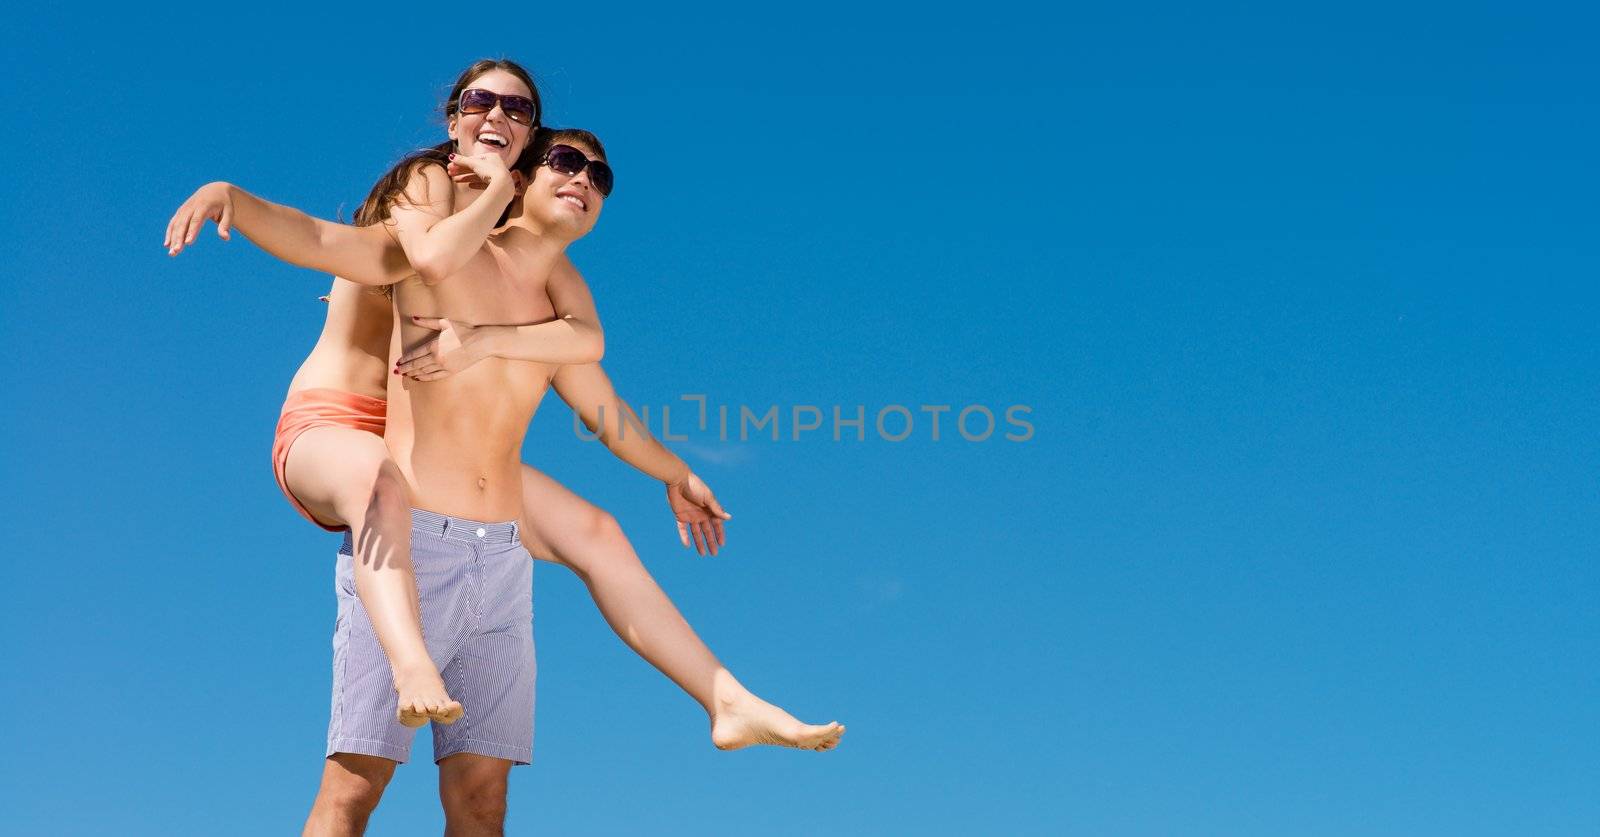 girl sitting on a guy having fun and waving their arms, behind blue sky